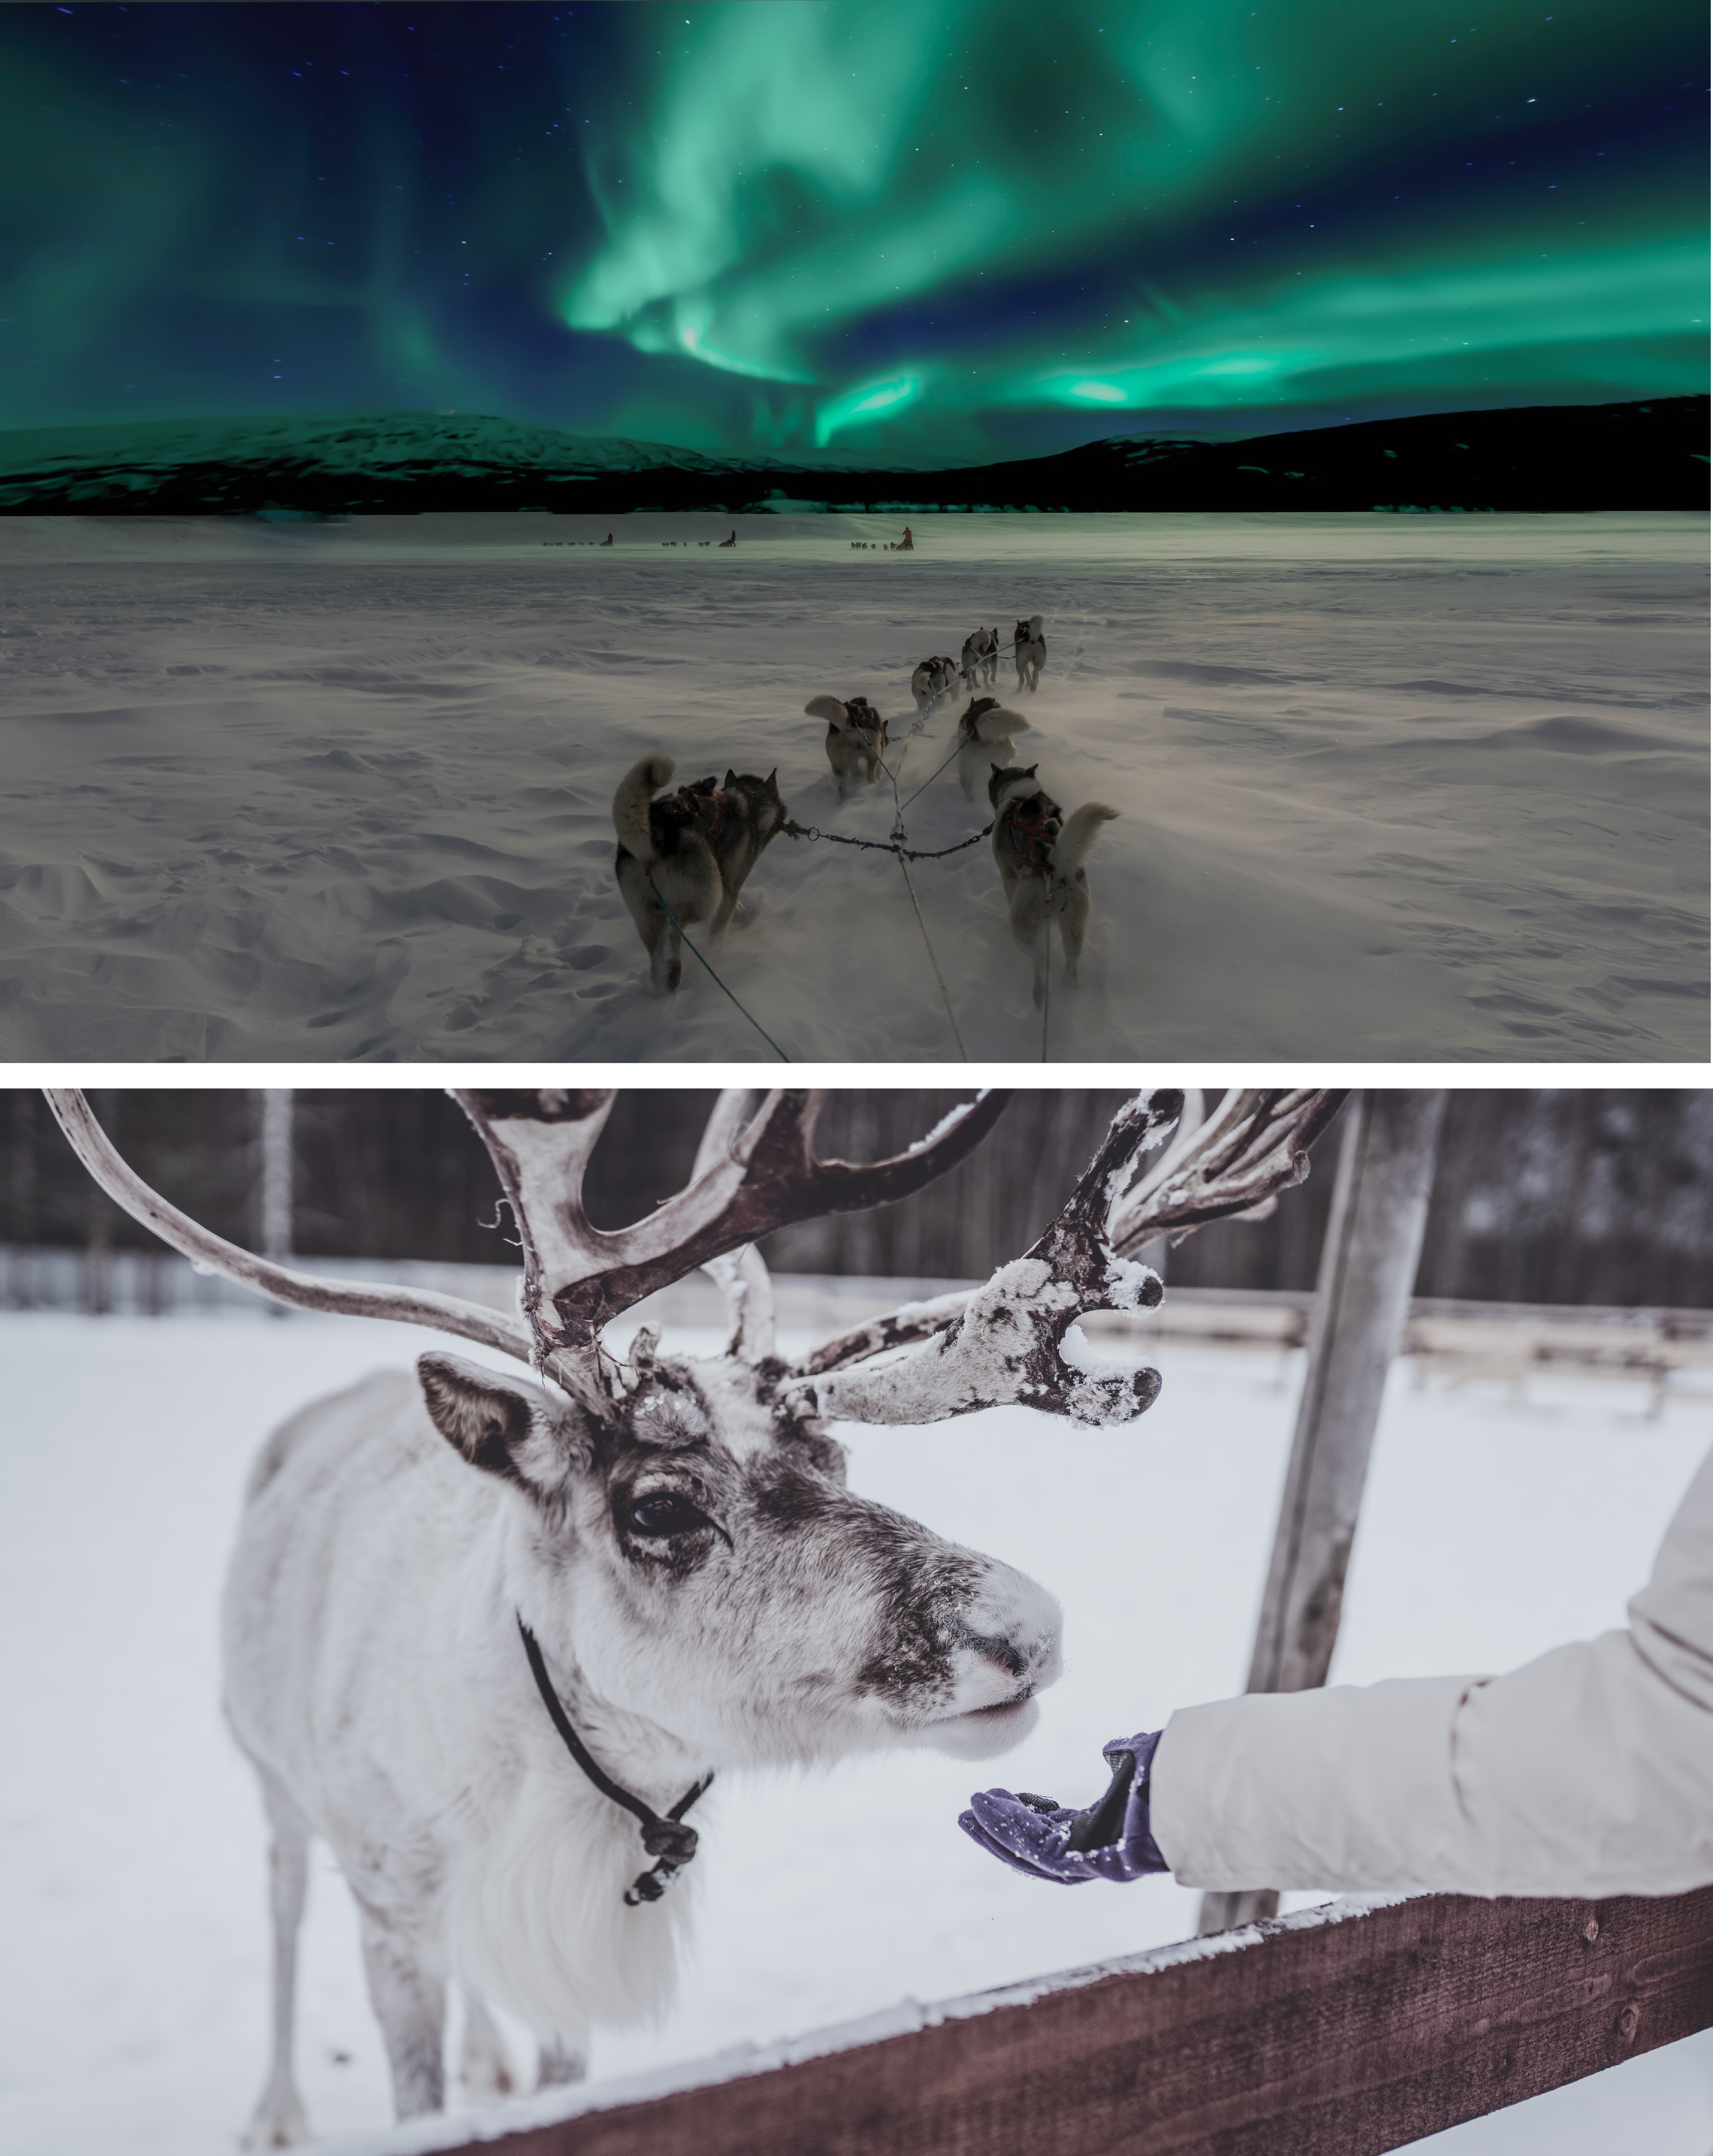 top image of a dog sled team with the northern lights in the sky, bottom image a hand feending a white reindeer